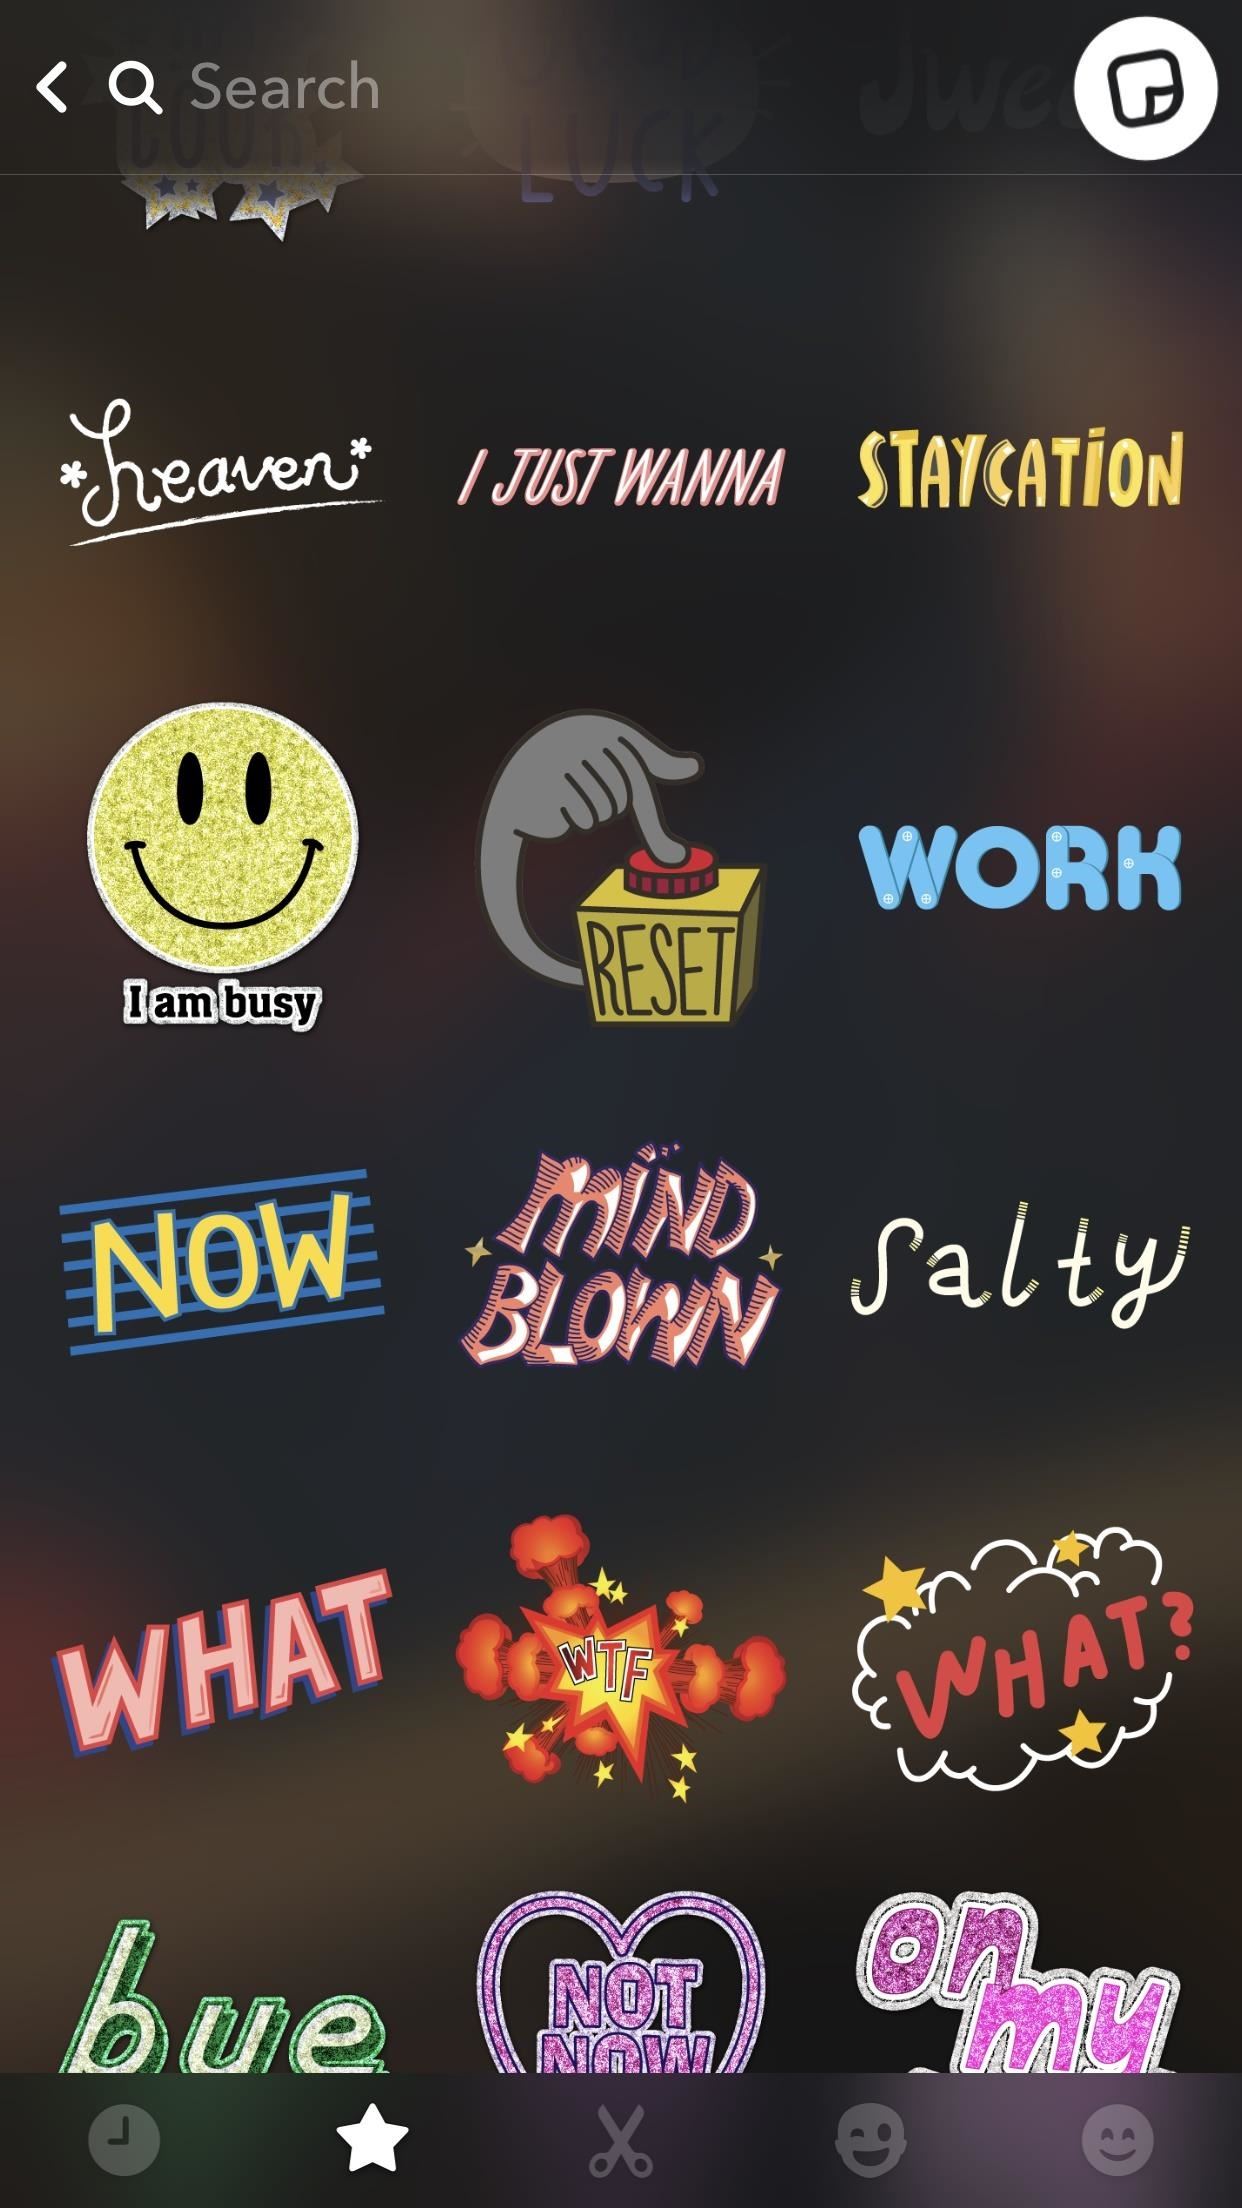 Snapchat 101: How to Create & Use Stickers